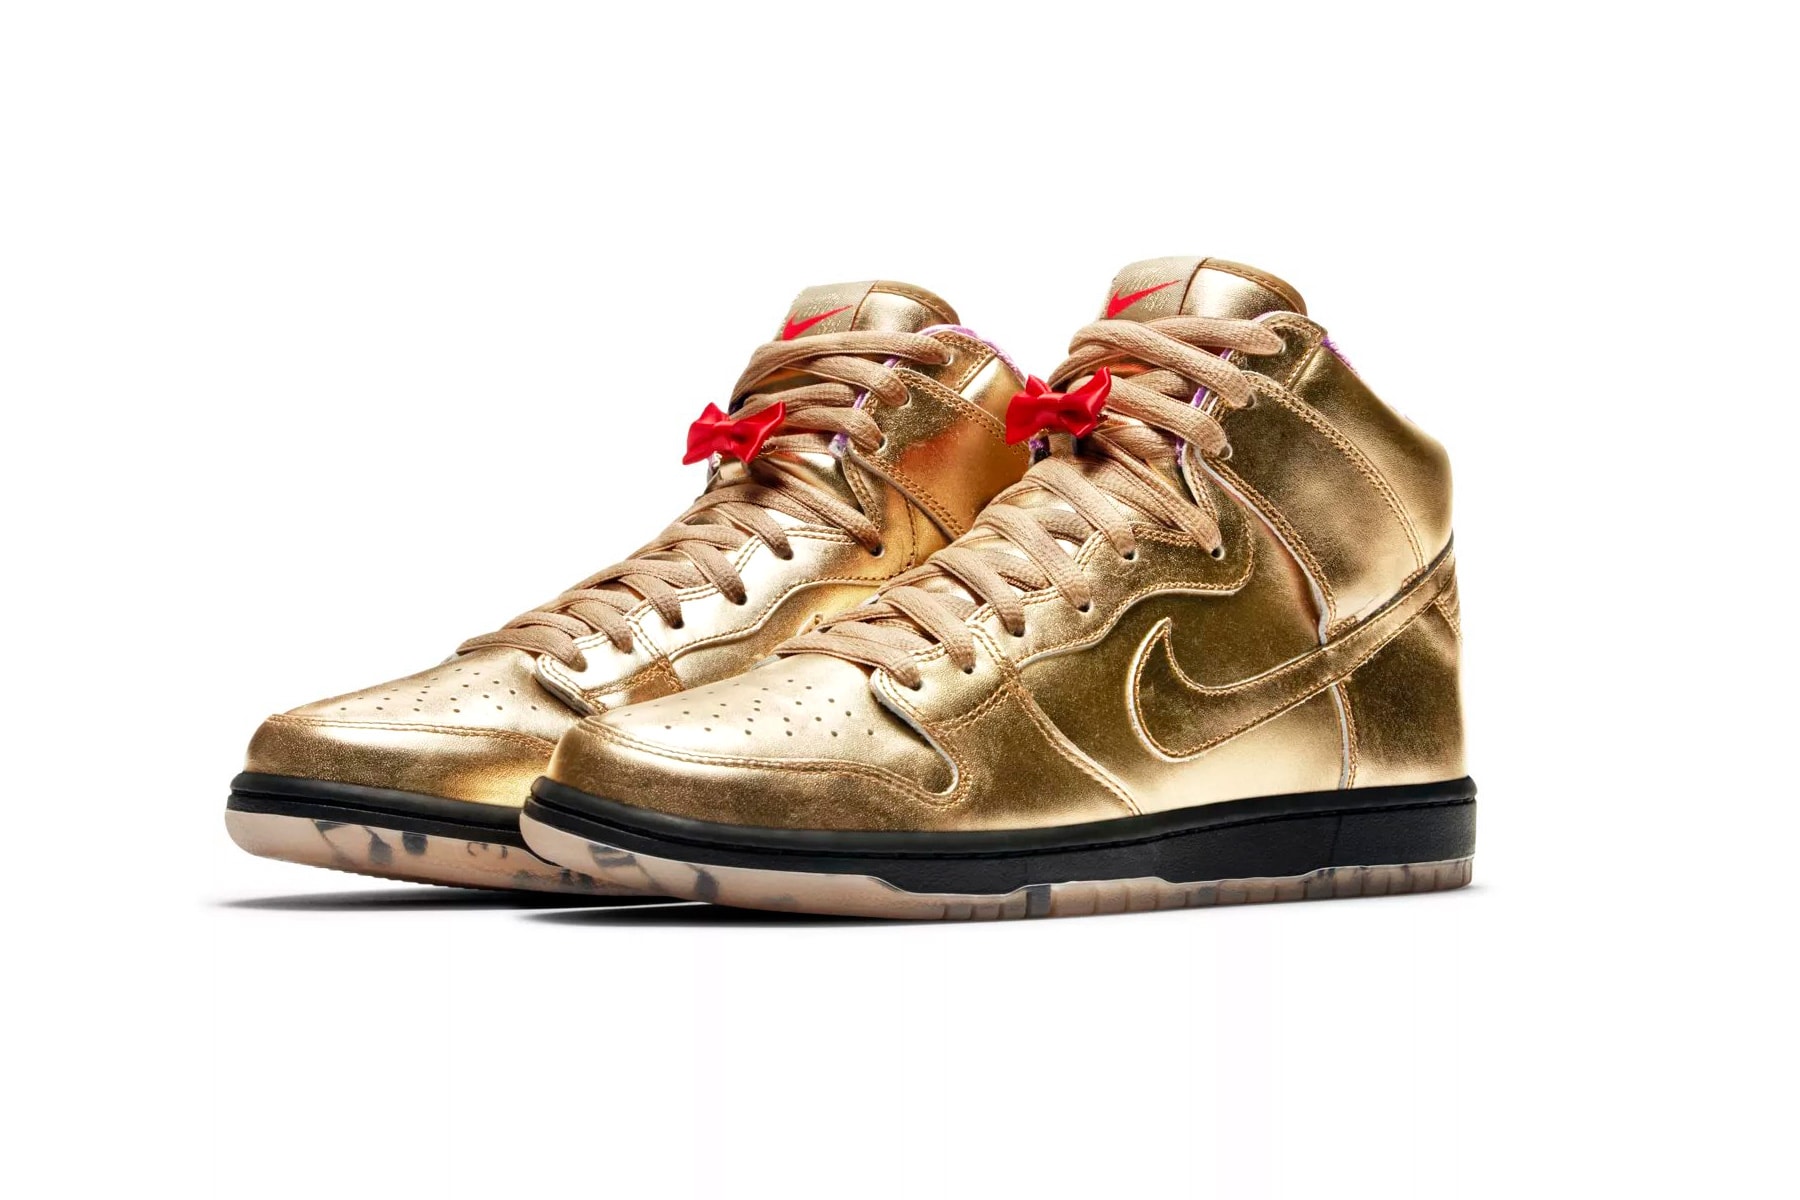 nike sb dunk high humidity release date 2018 september footwear gold black purple red